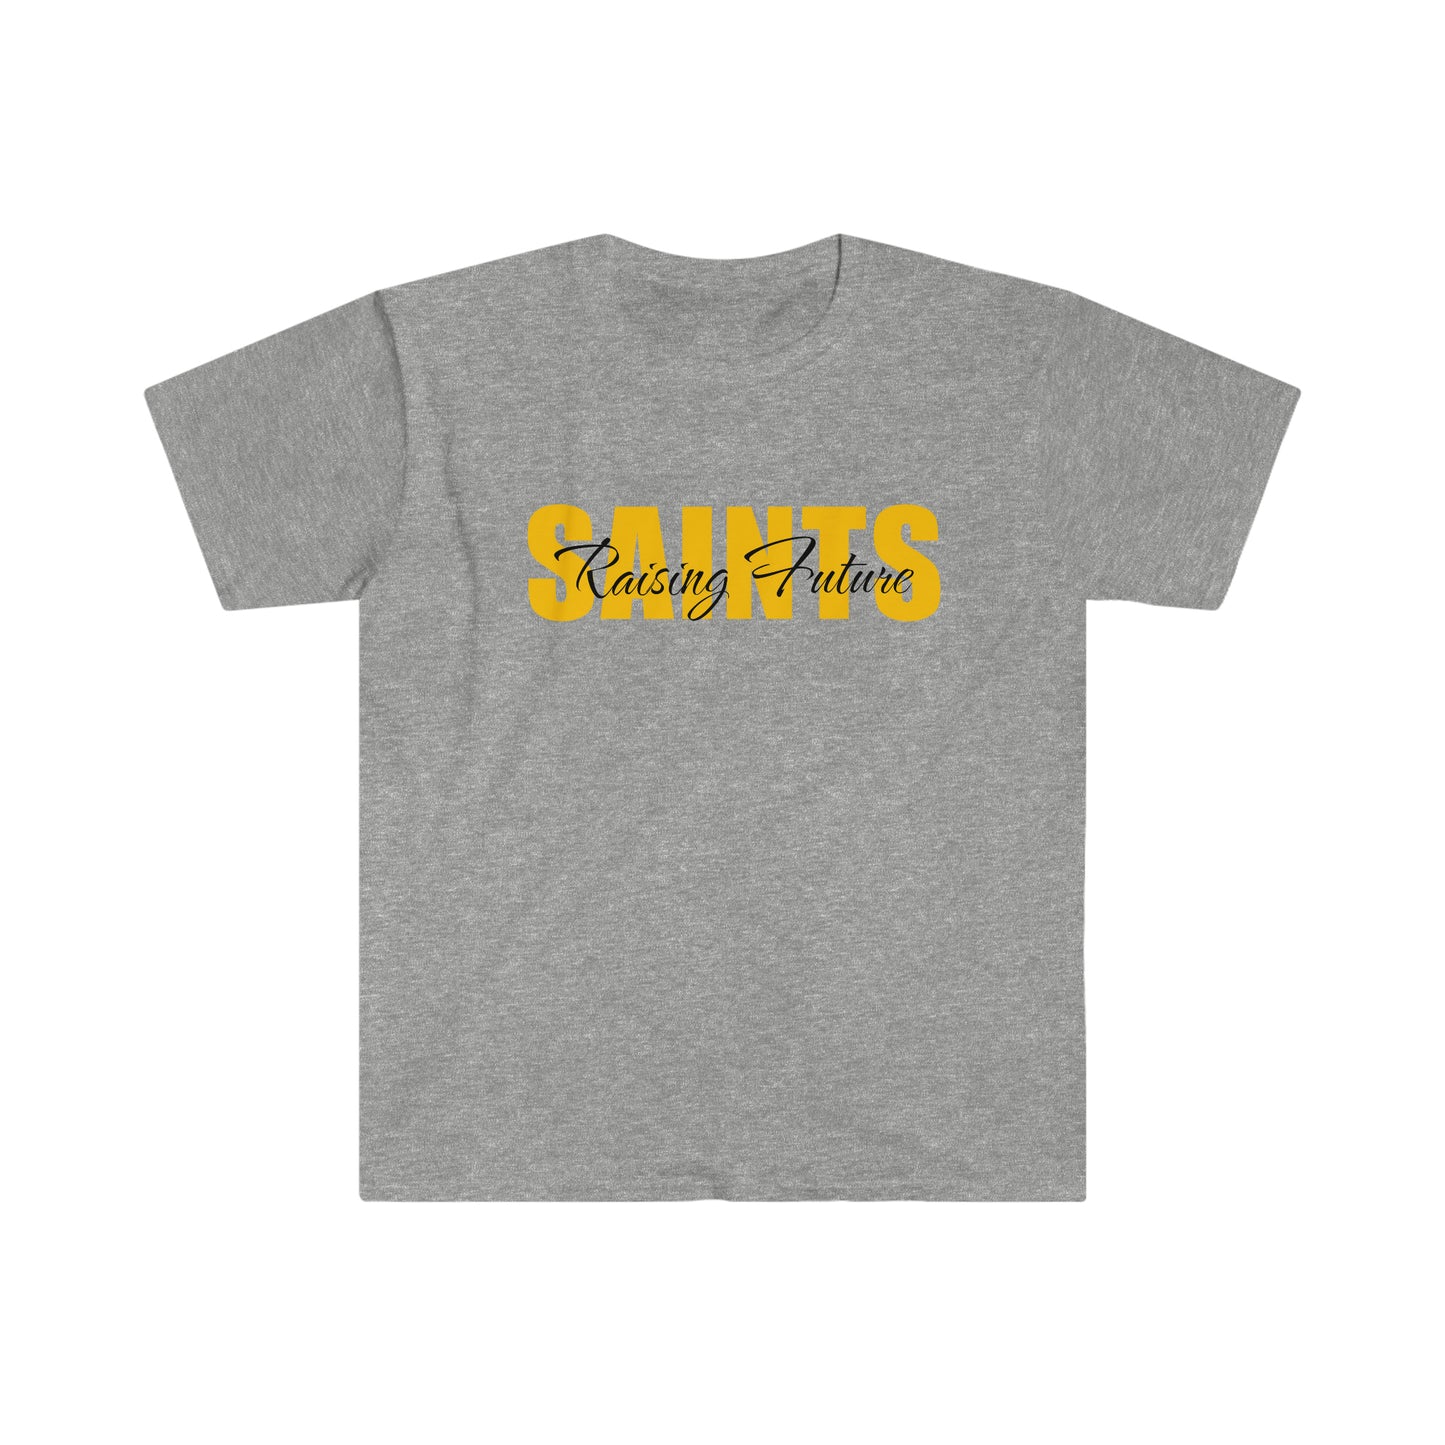 Heather Gray T-Shirt with "Raising Future Saints" printed on it in yellow and black font.